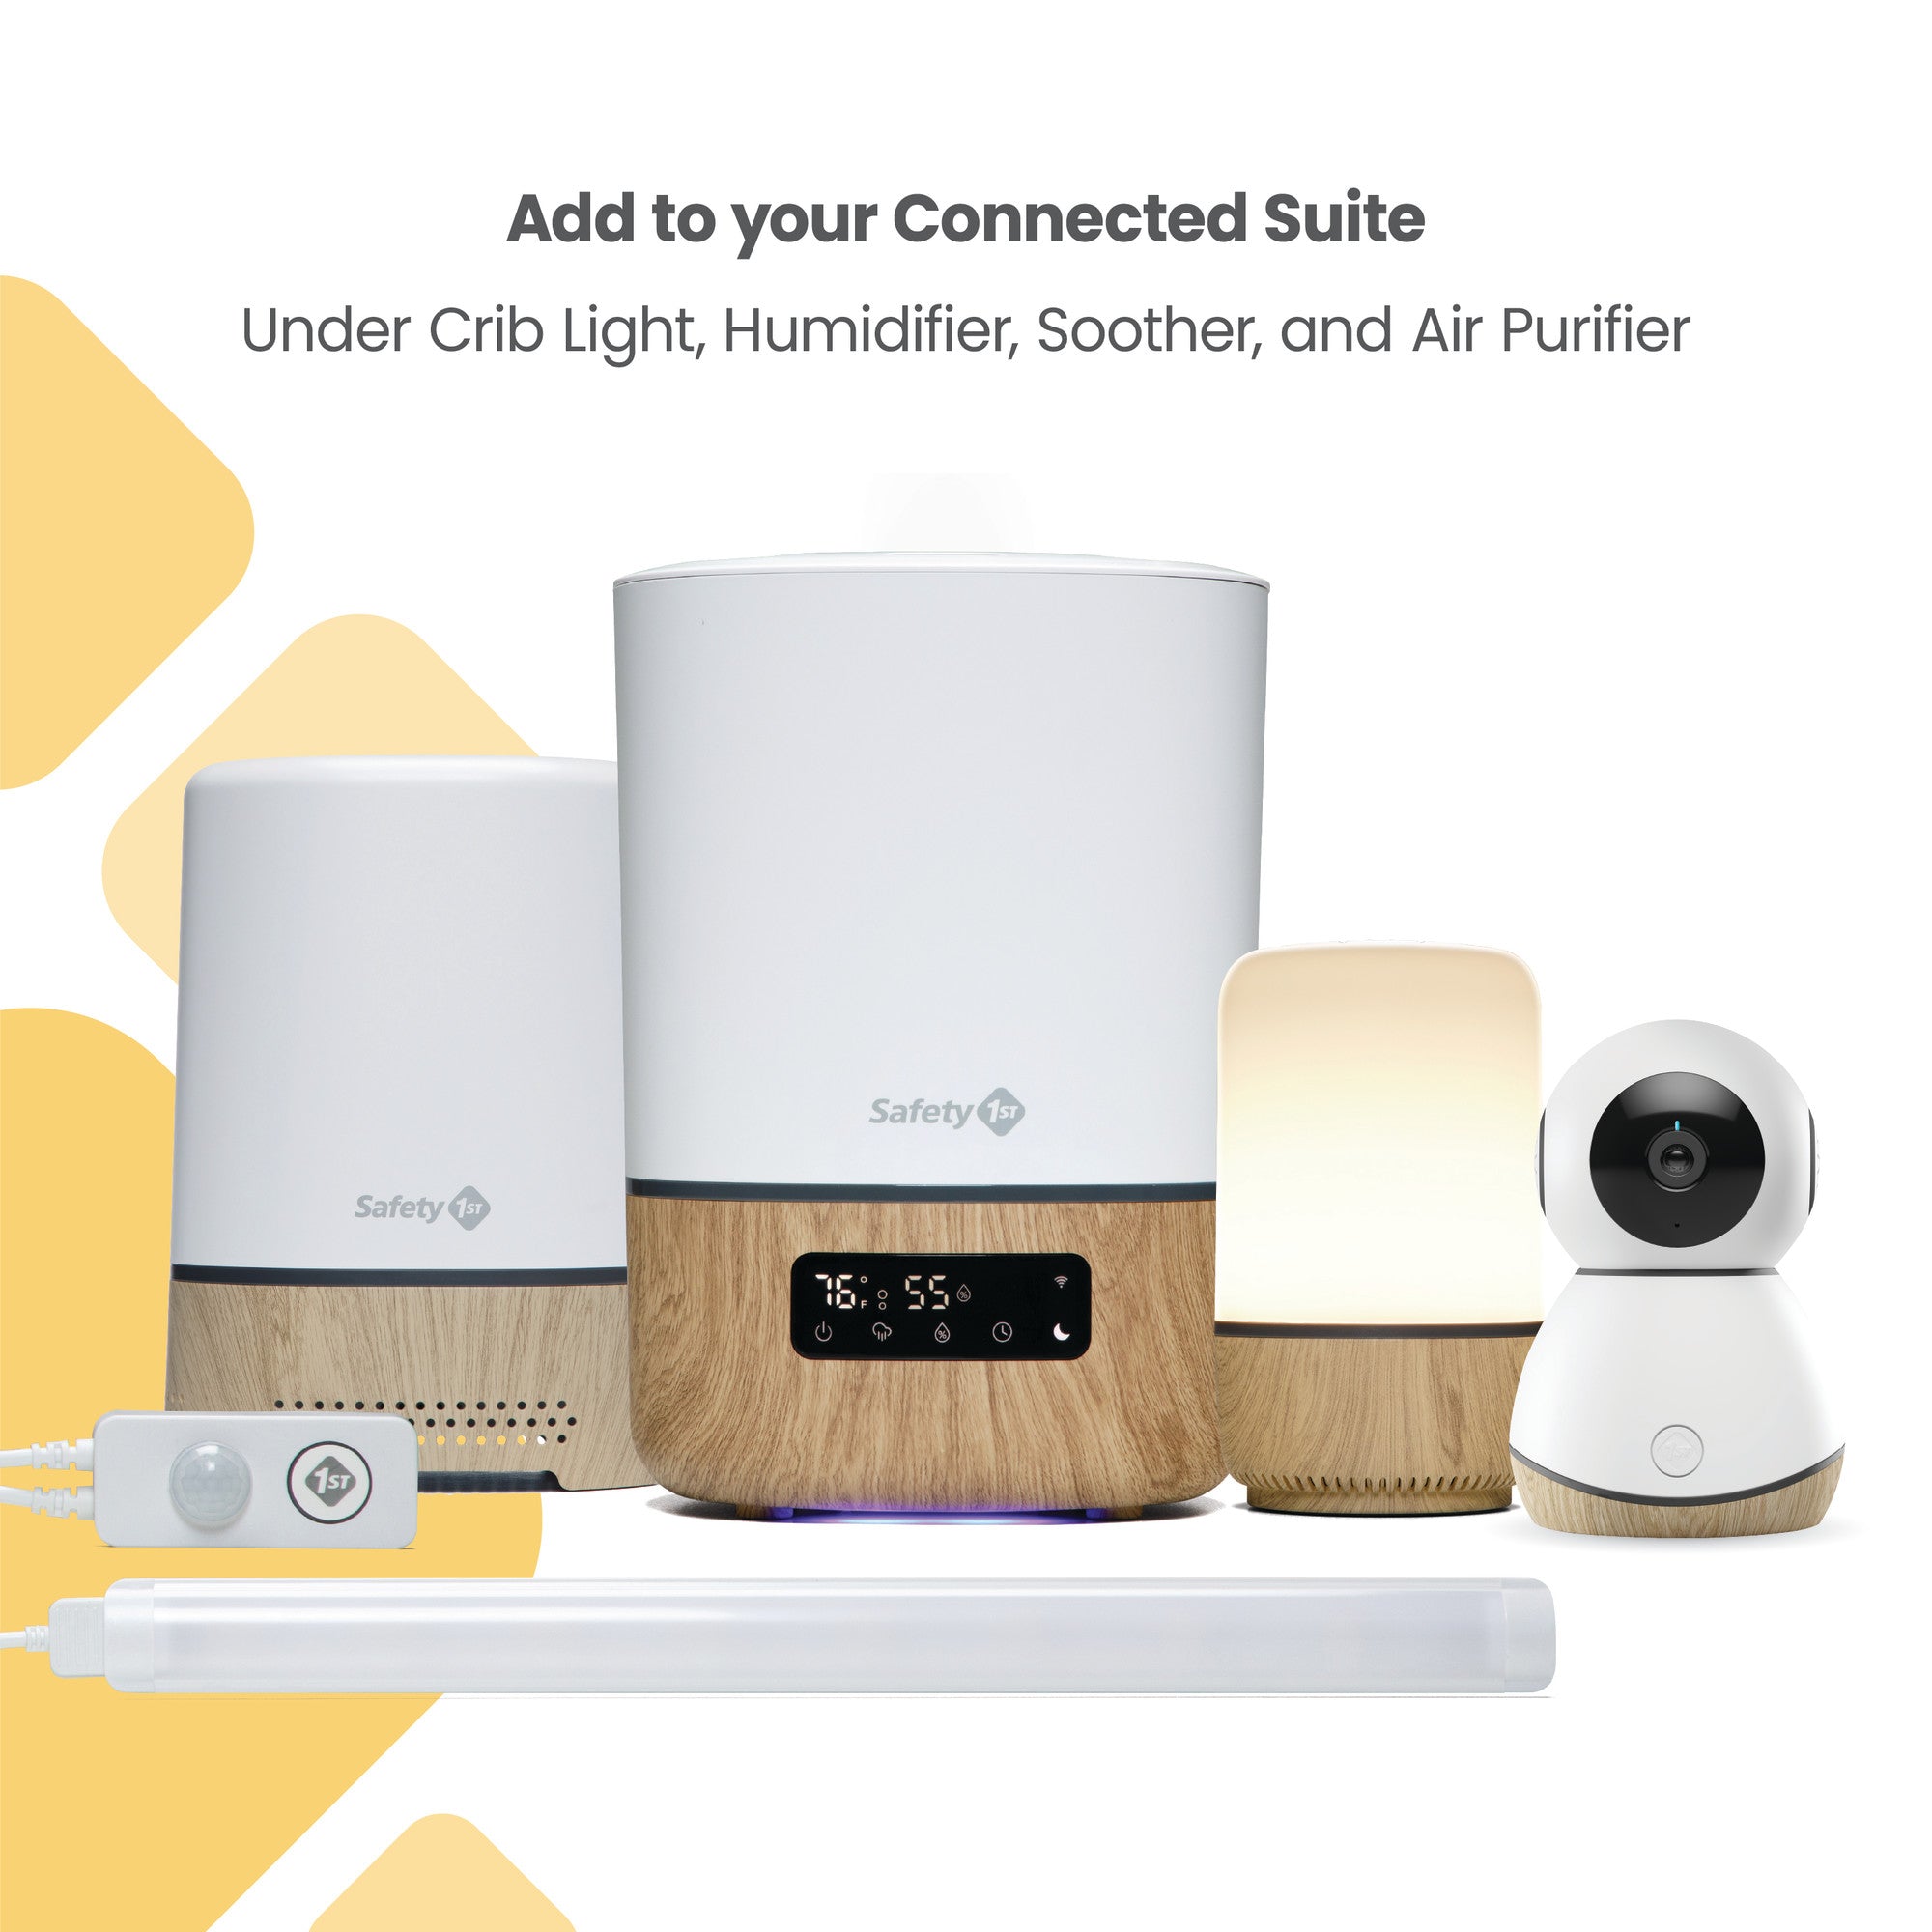 360° Smart Baby Monitor - add to your connected suite - under crib light, humidifier, soother, and air purifier